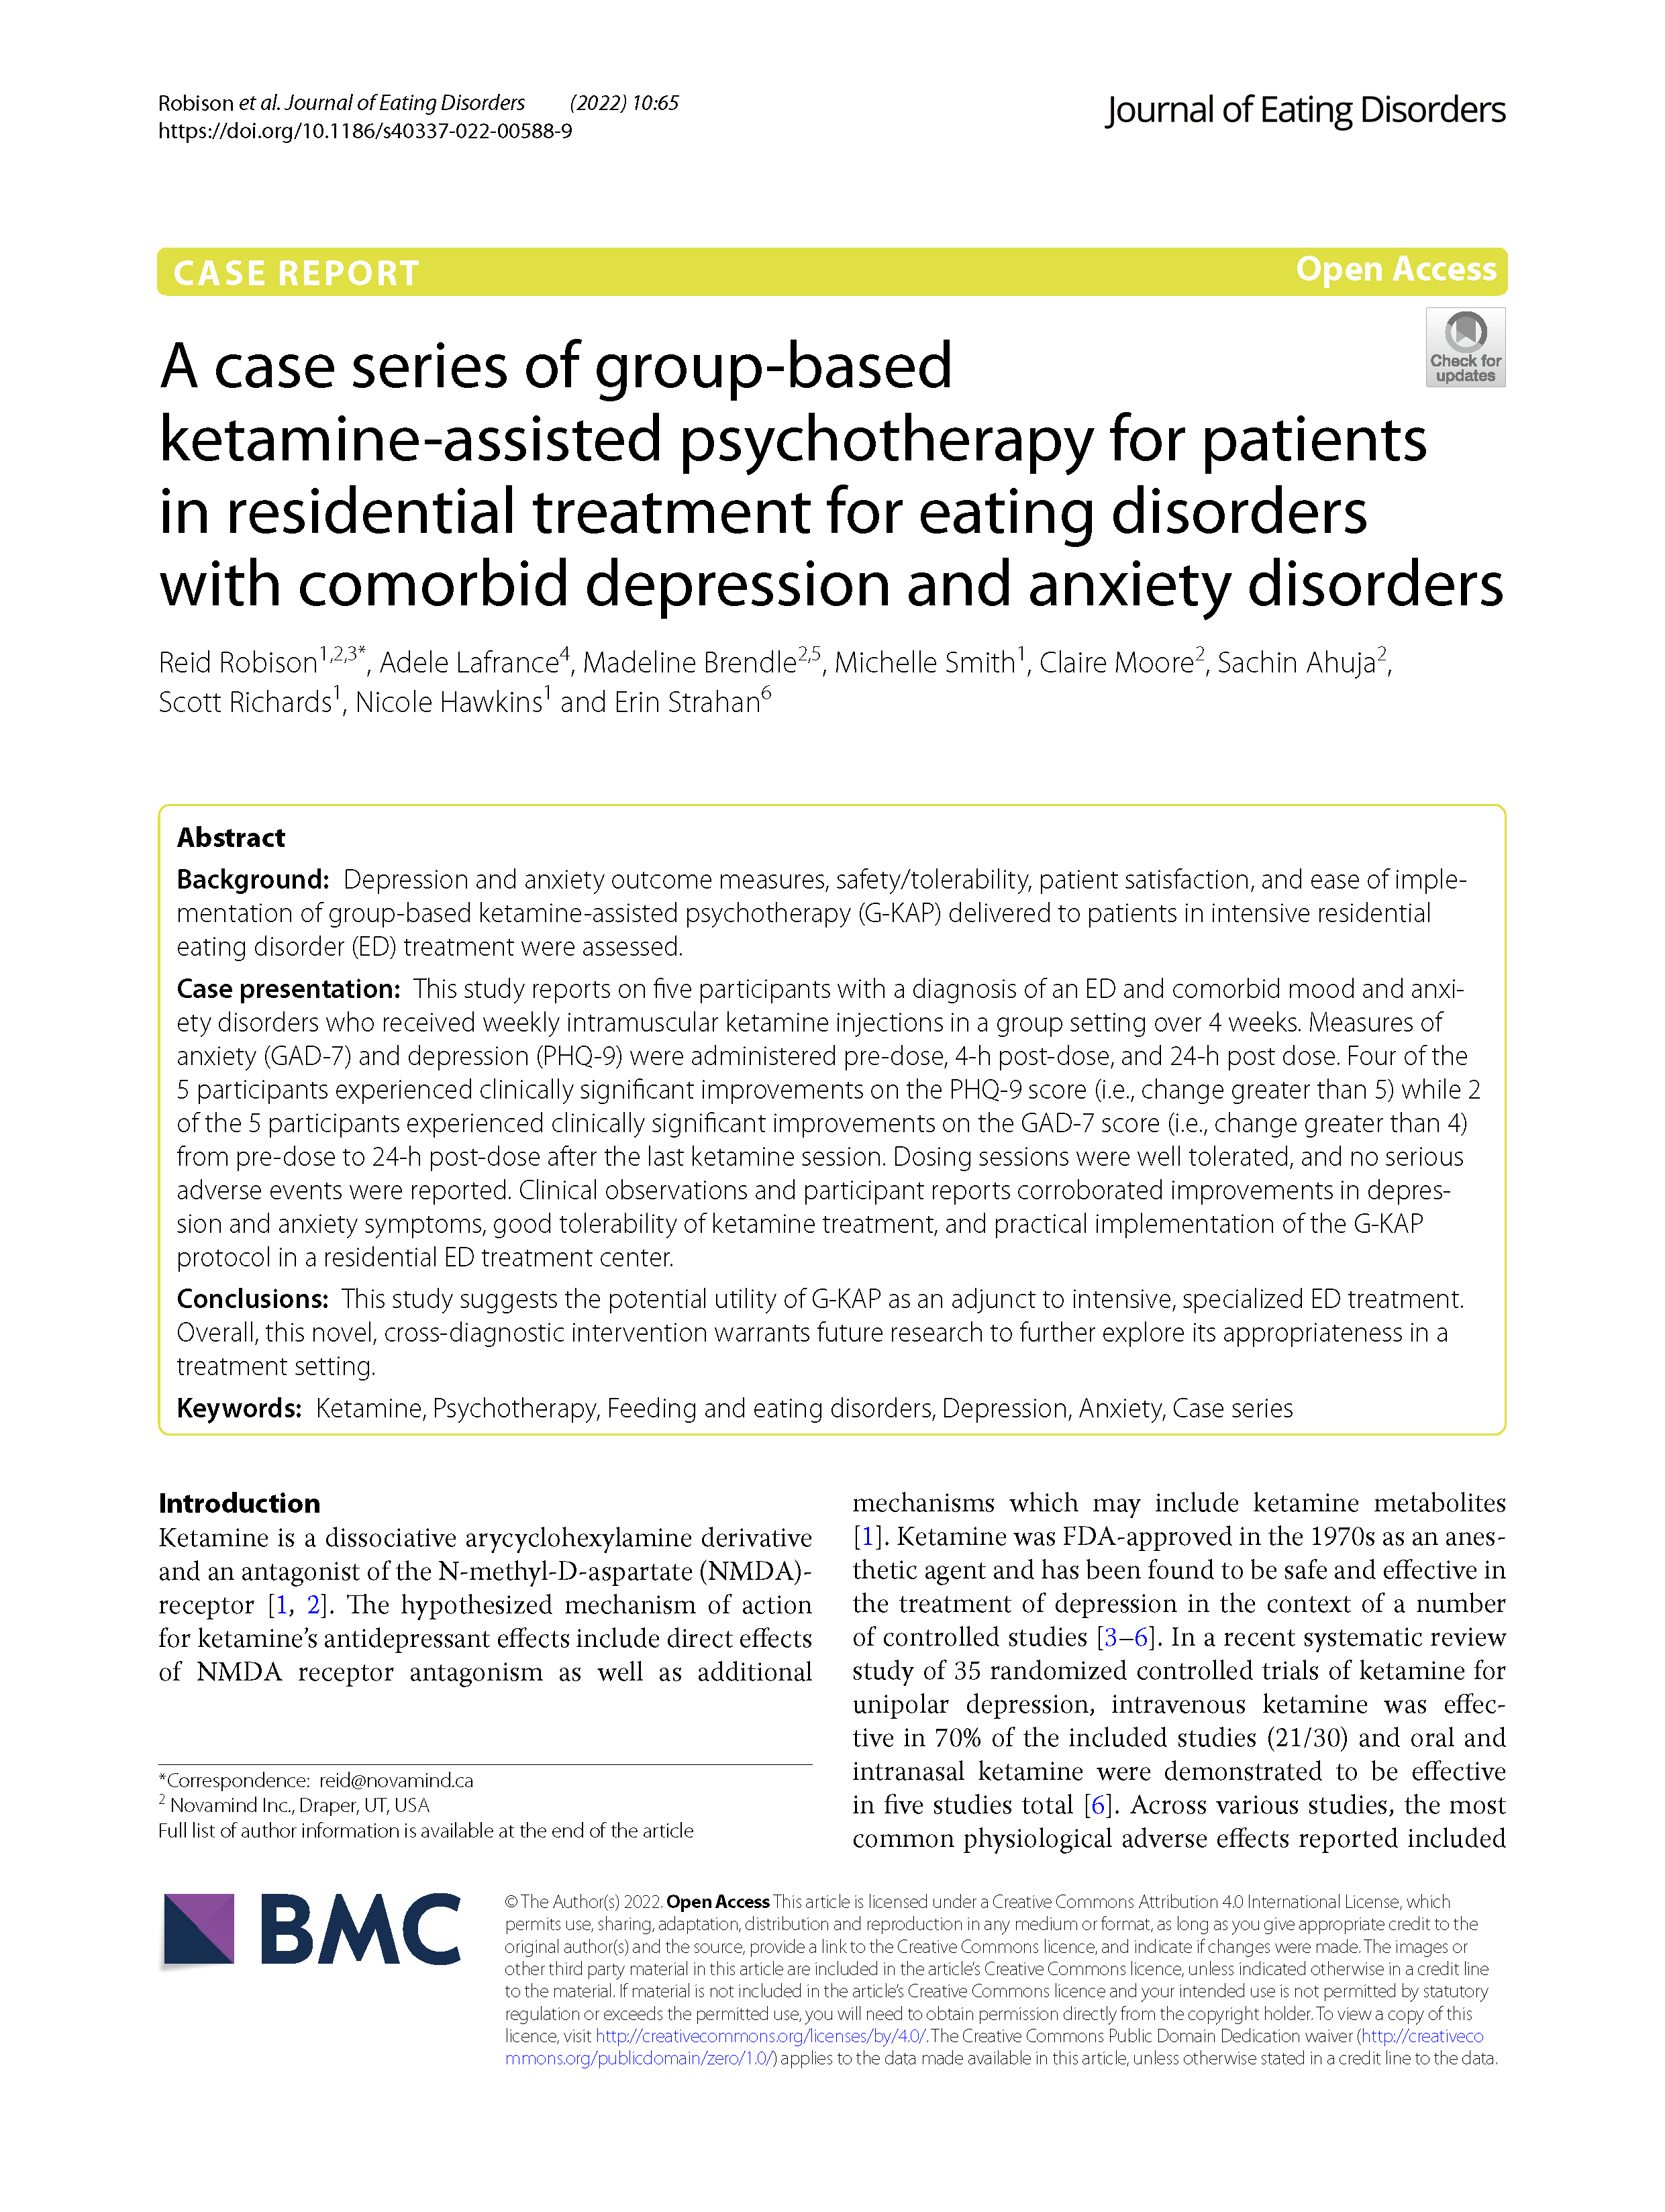 Group-based ketamine-assisted psychotherapy for patients in residential treatment for eating disorders with comorbid depression and anxiety disorders_Page_1.png